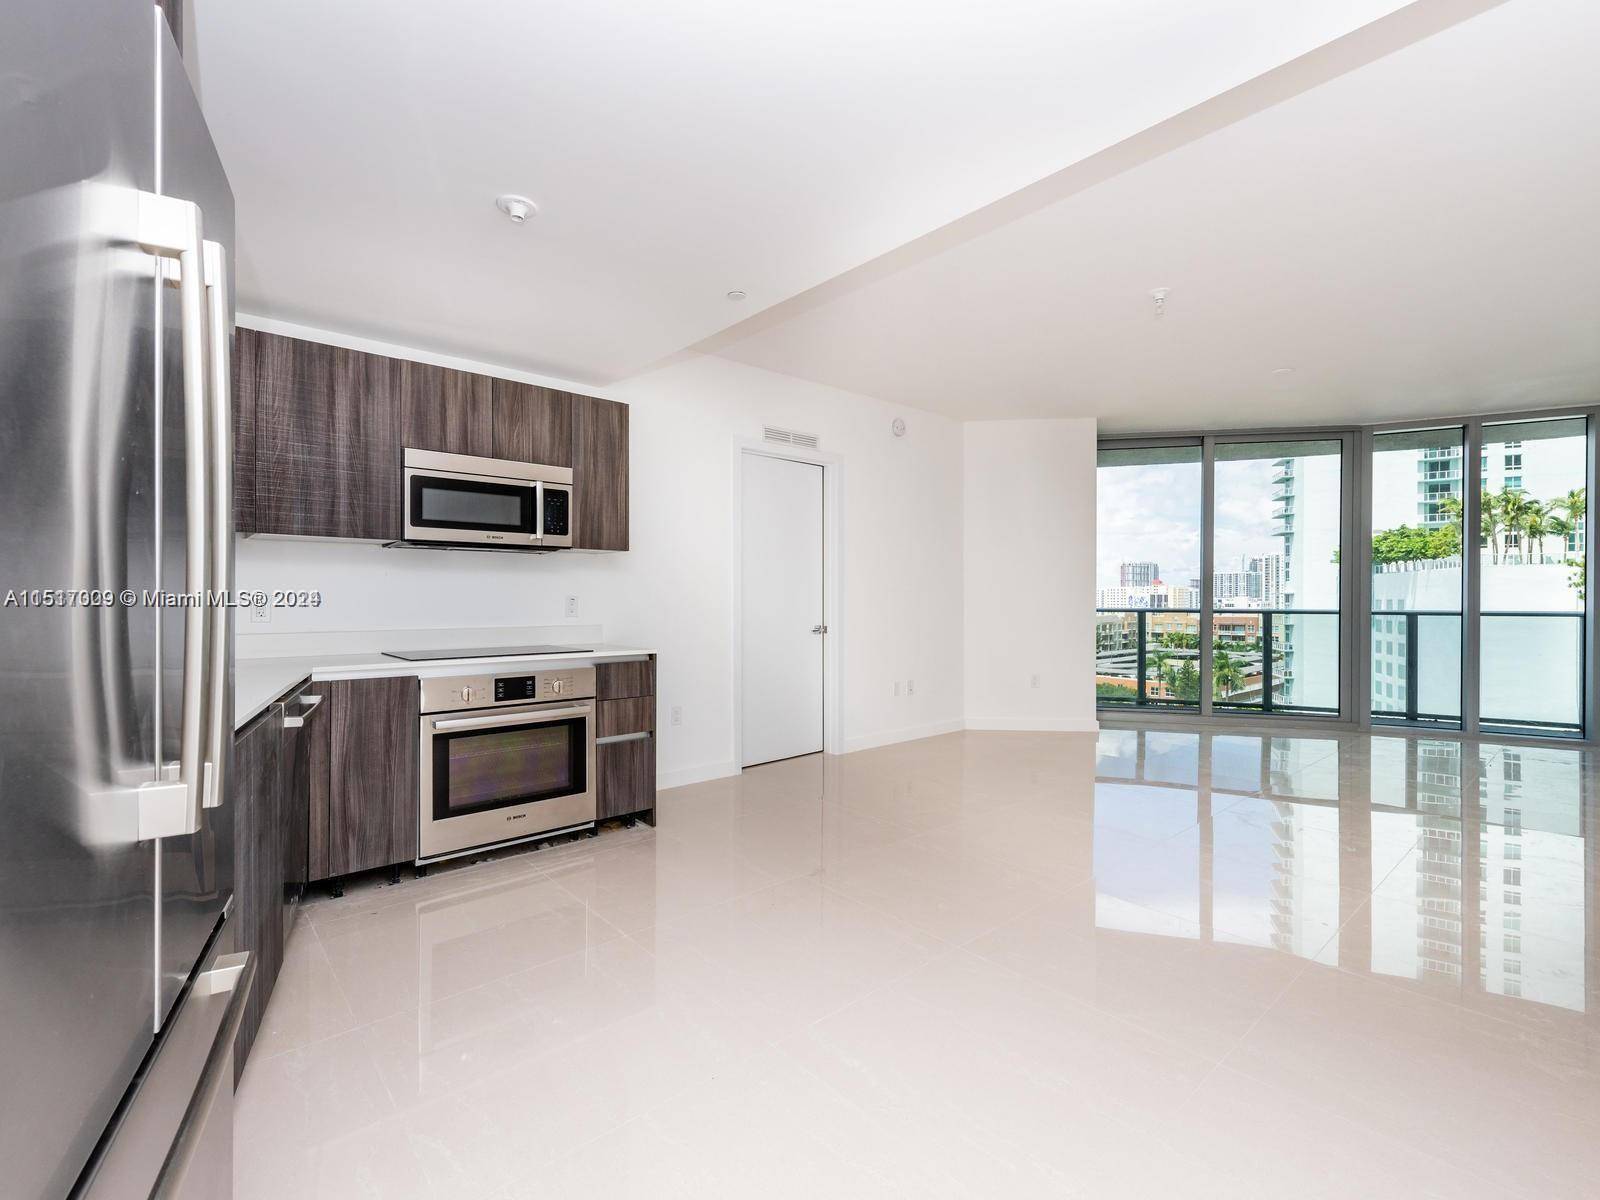 LUXURIOUS 2BED 2. 5 BATHS w wrap around BALCONY facing NORTH with CITY BAY VIEWS.